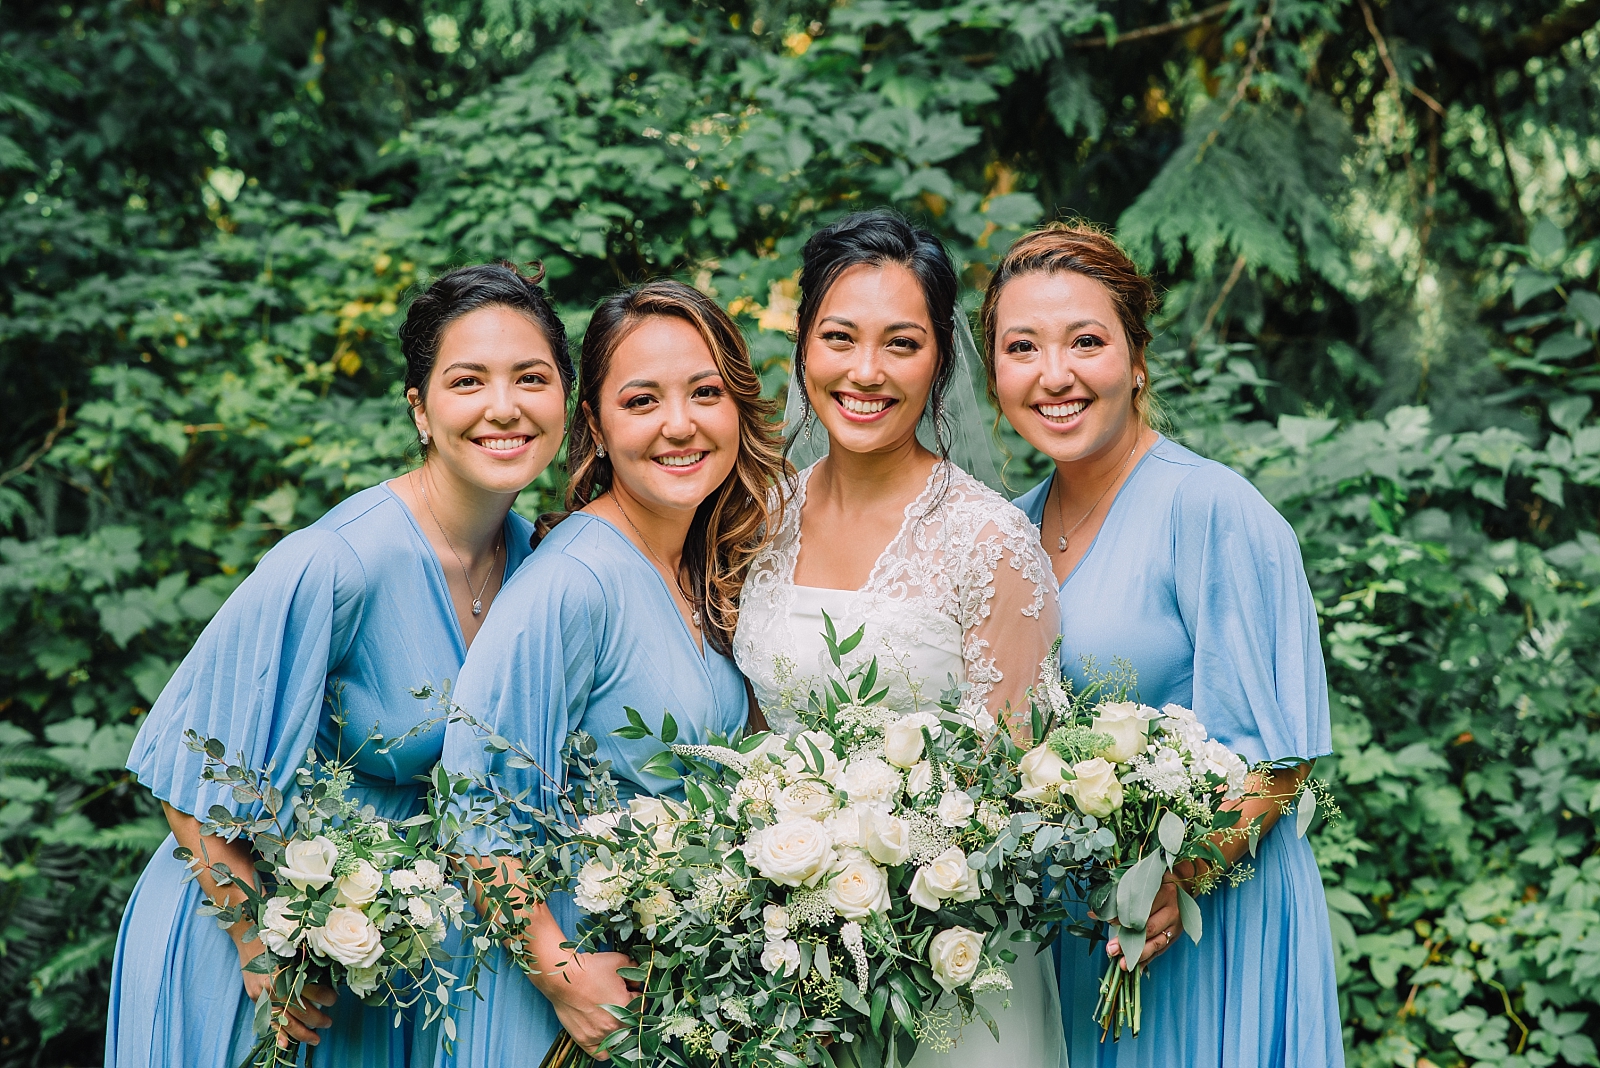 bride standing with her bridesmaids who are wearing blue gowns as they all hold their white bridal bouquets